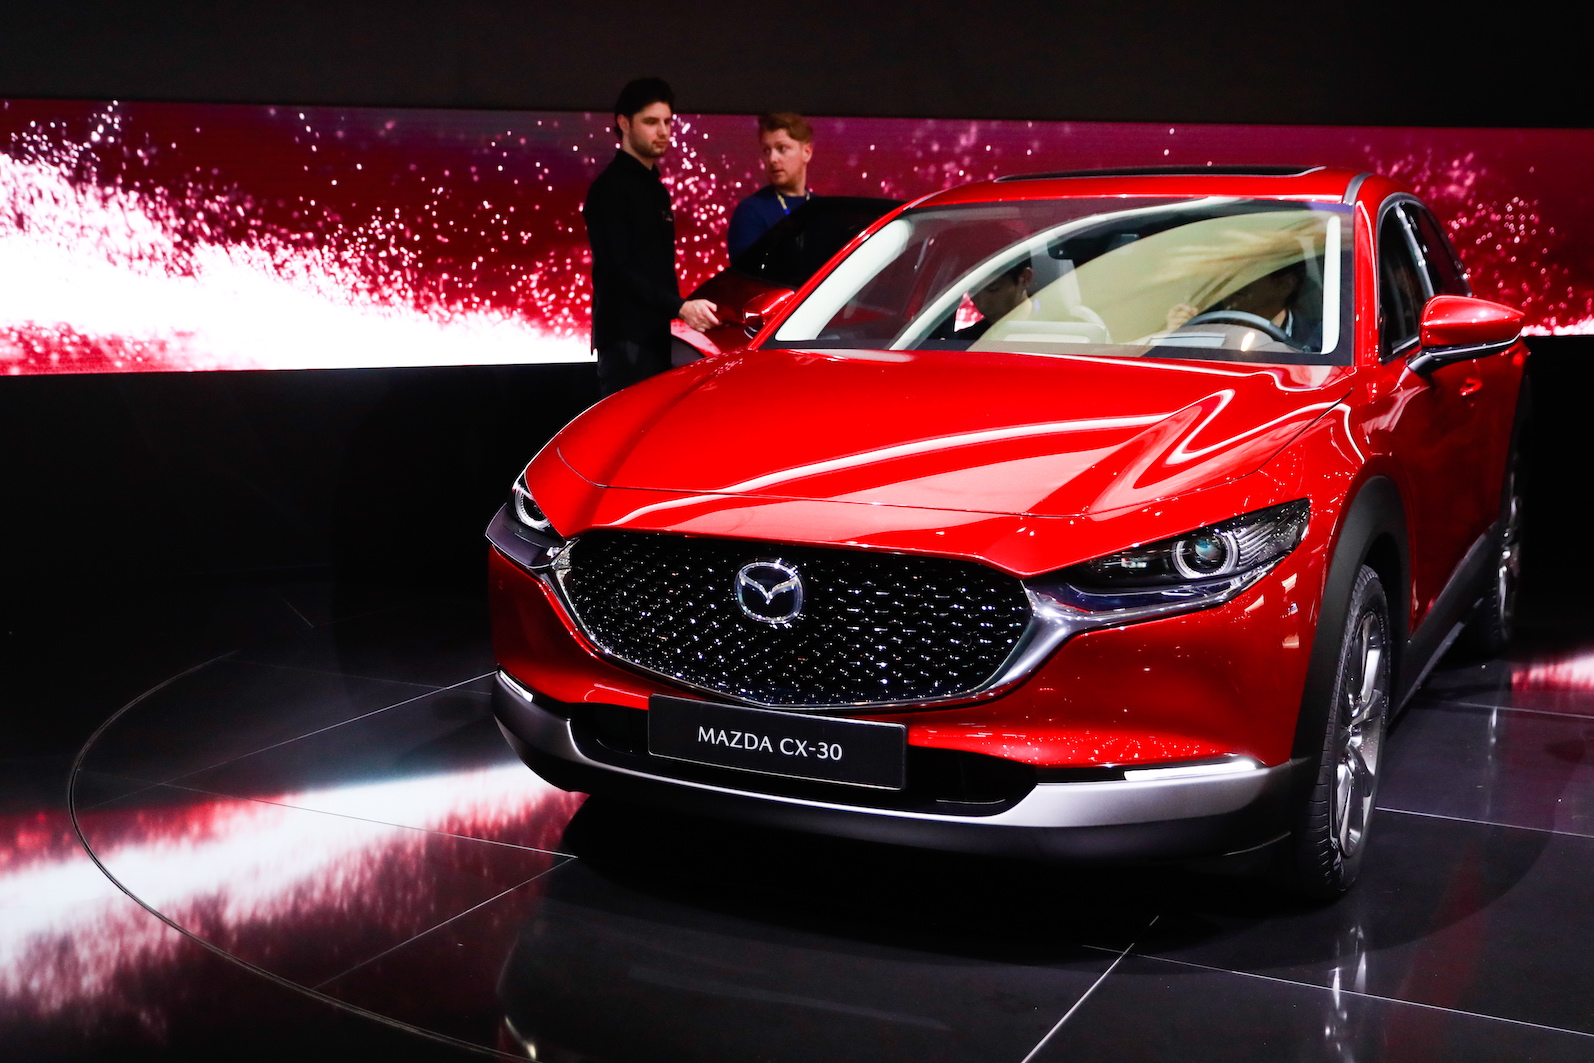 A 2020 CX-30 on display at the 89th Geneva International Motor Show